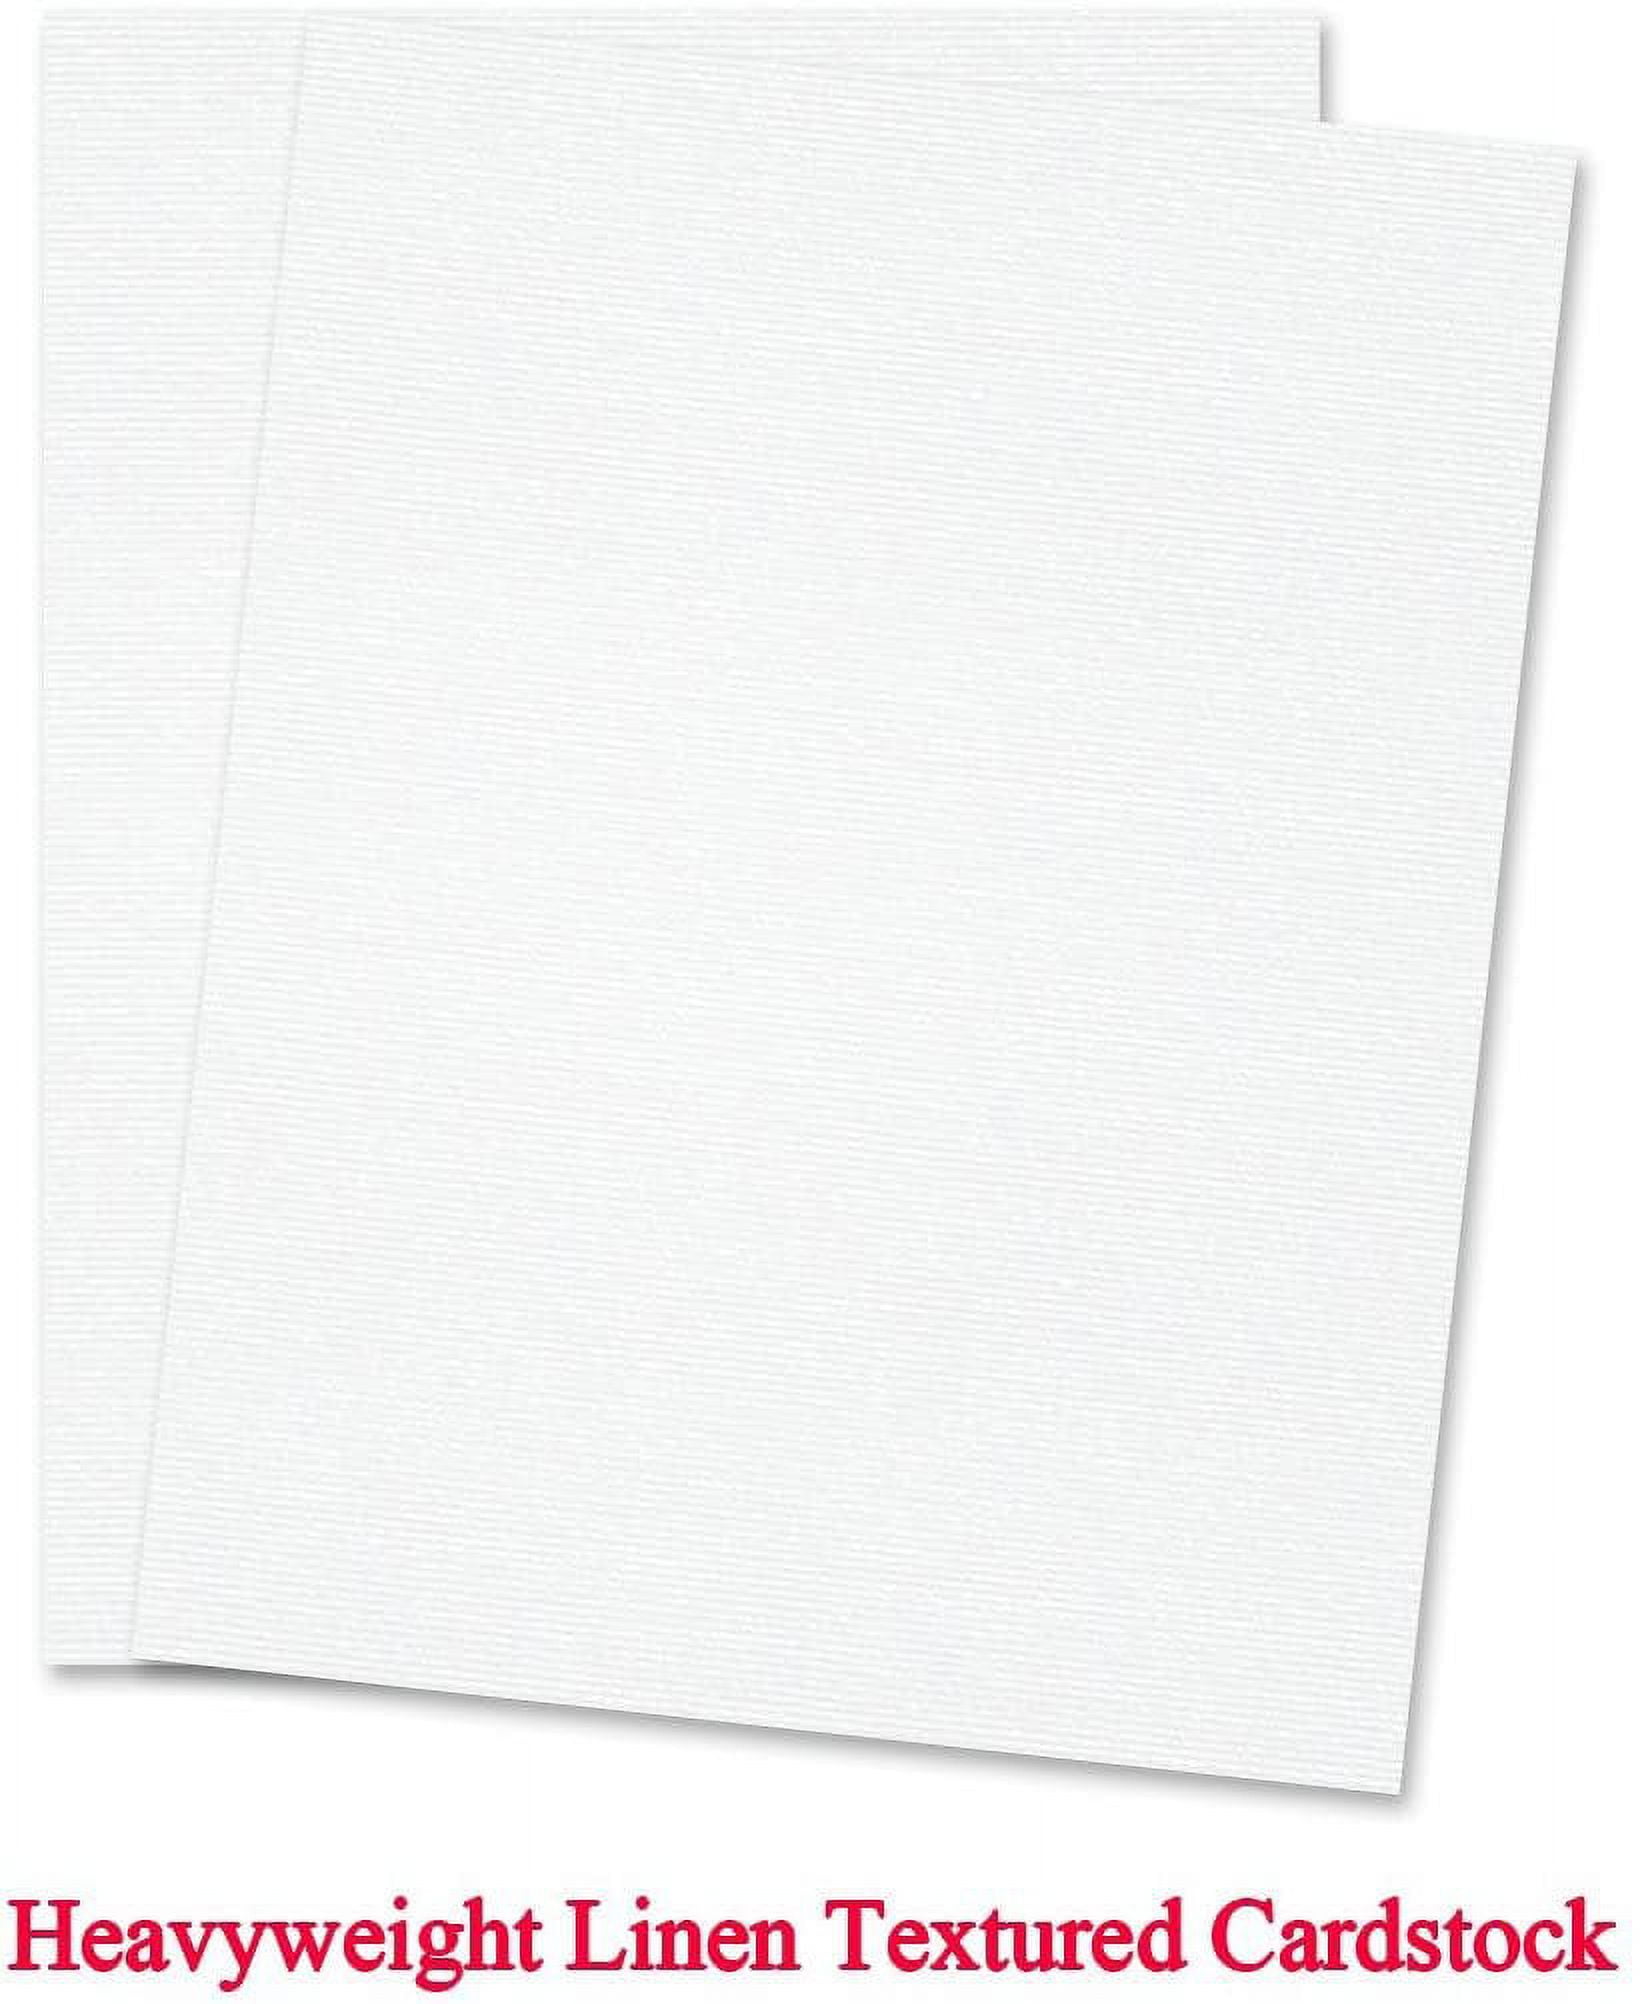 100 Pieces 5 inch x 7 inch Premium White Cardstock, Heavyweight 74lb Cover 200 gsm, Printable and Blank for Greeting Cards, Invitations, Photos, and